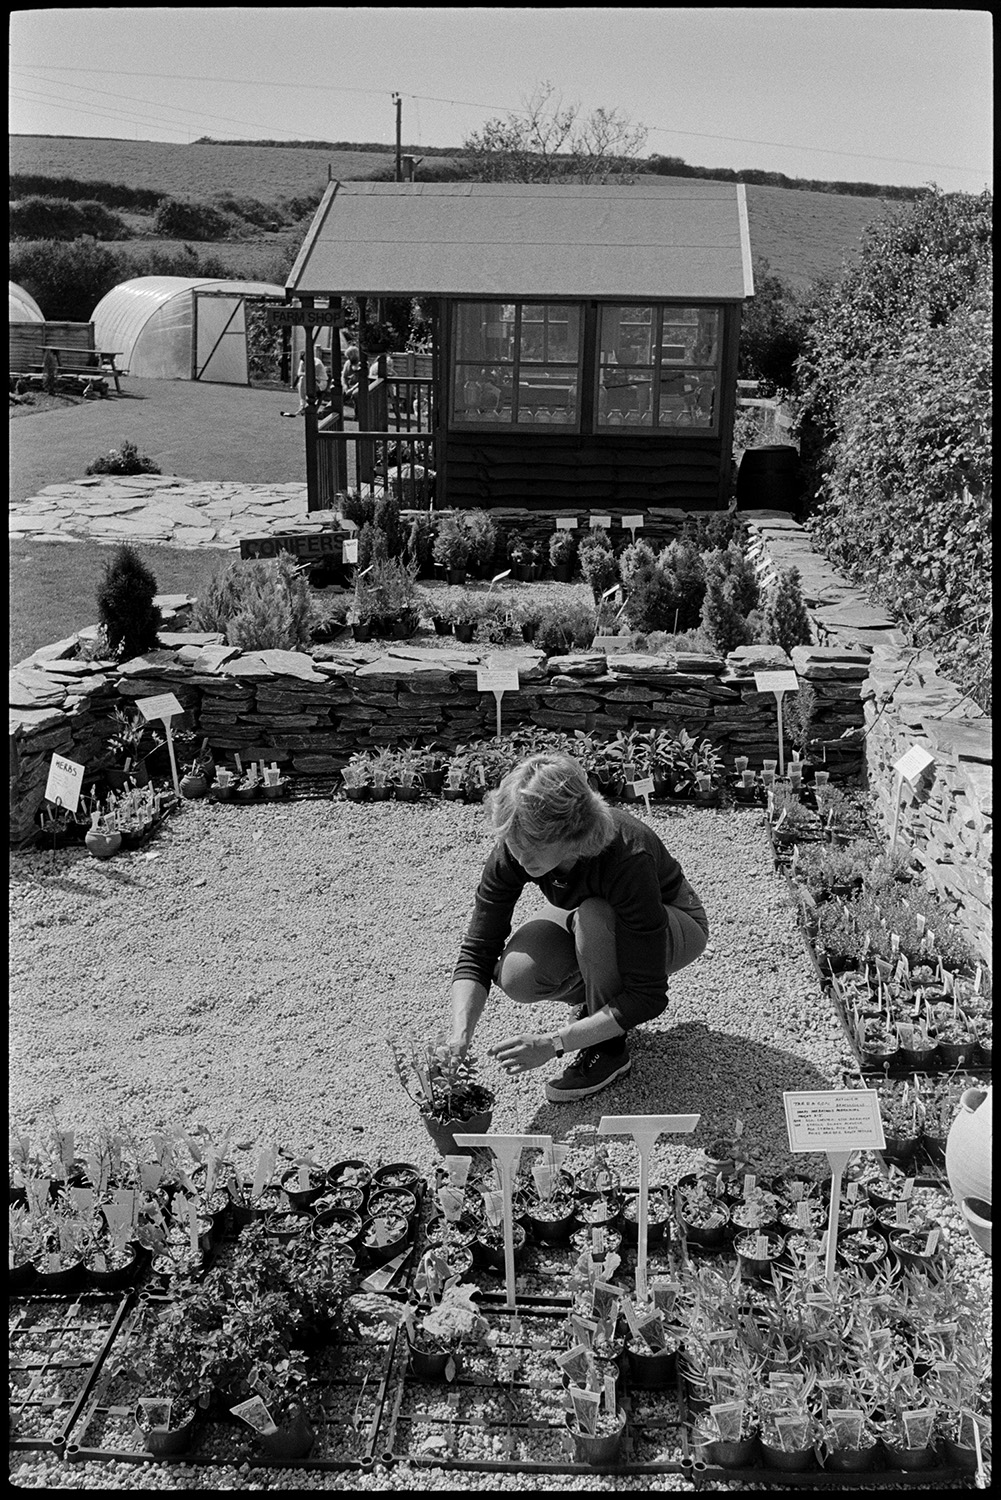 Woman working on herb farm herb garden and shop, chickens. 
[Sally Hollis checking herbs in pots at Darracott Farm, Welcombe. A shed and polytunnels can be seen in the background.]